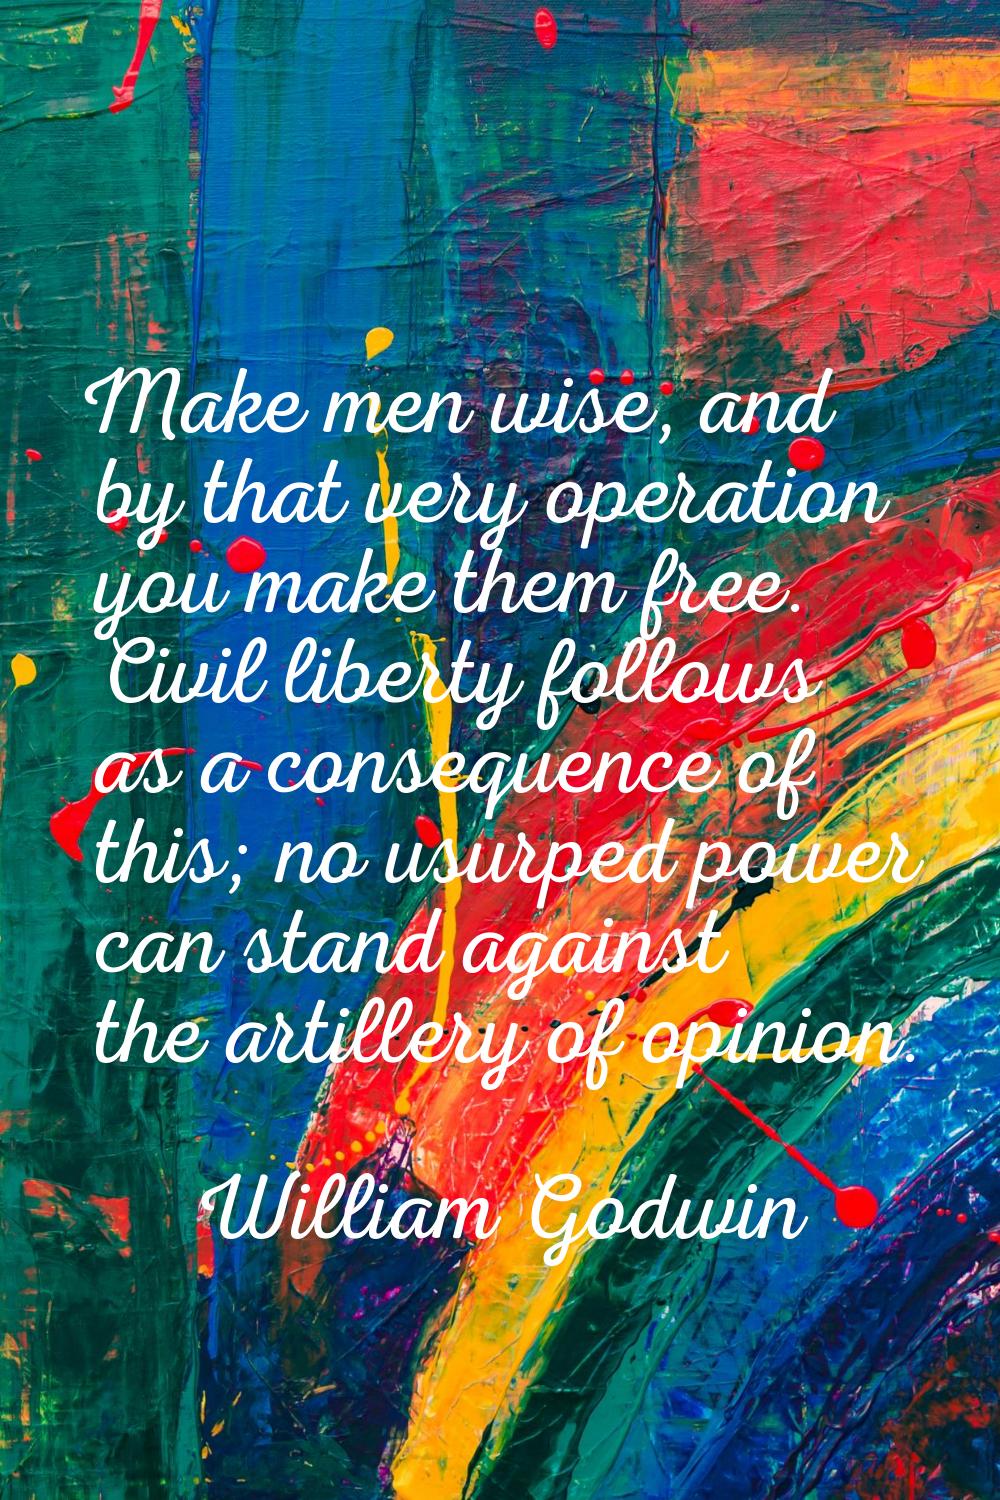 Make men wise, and by that very operation you make them free. Civil liberty follows as a consequenc